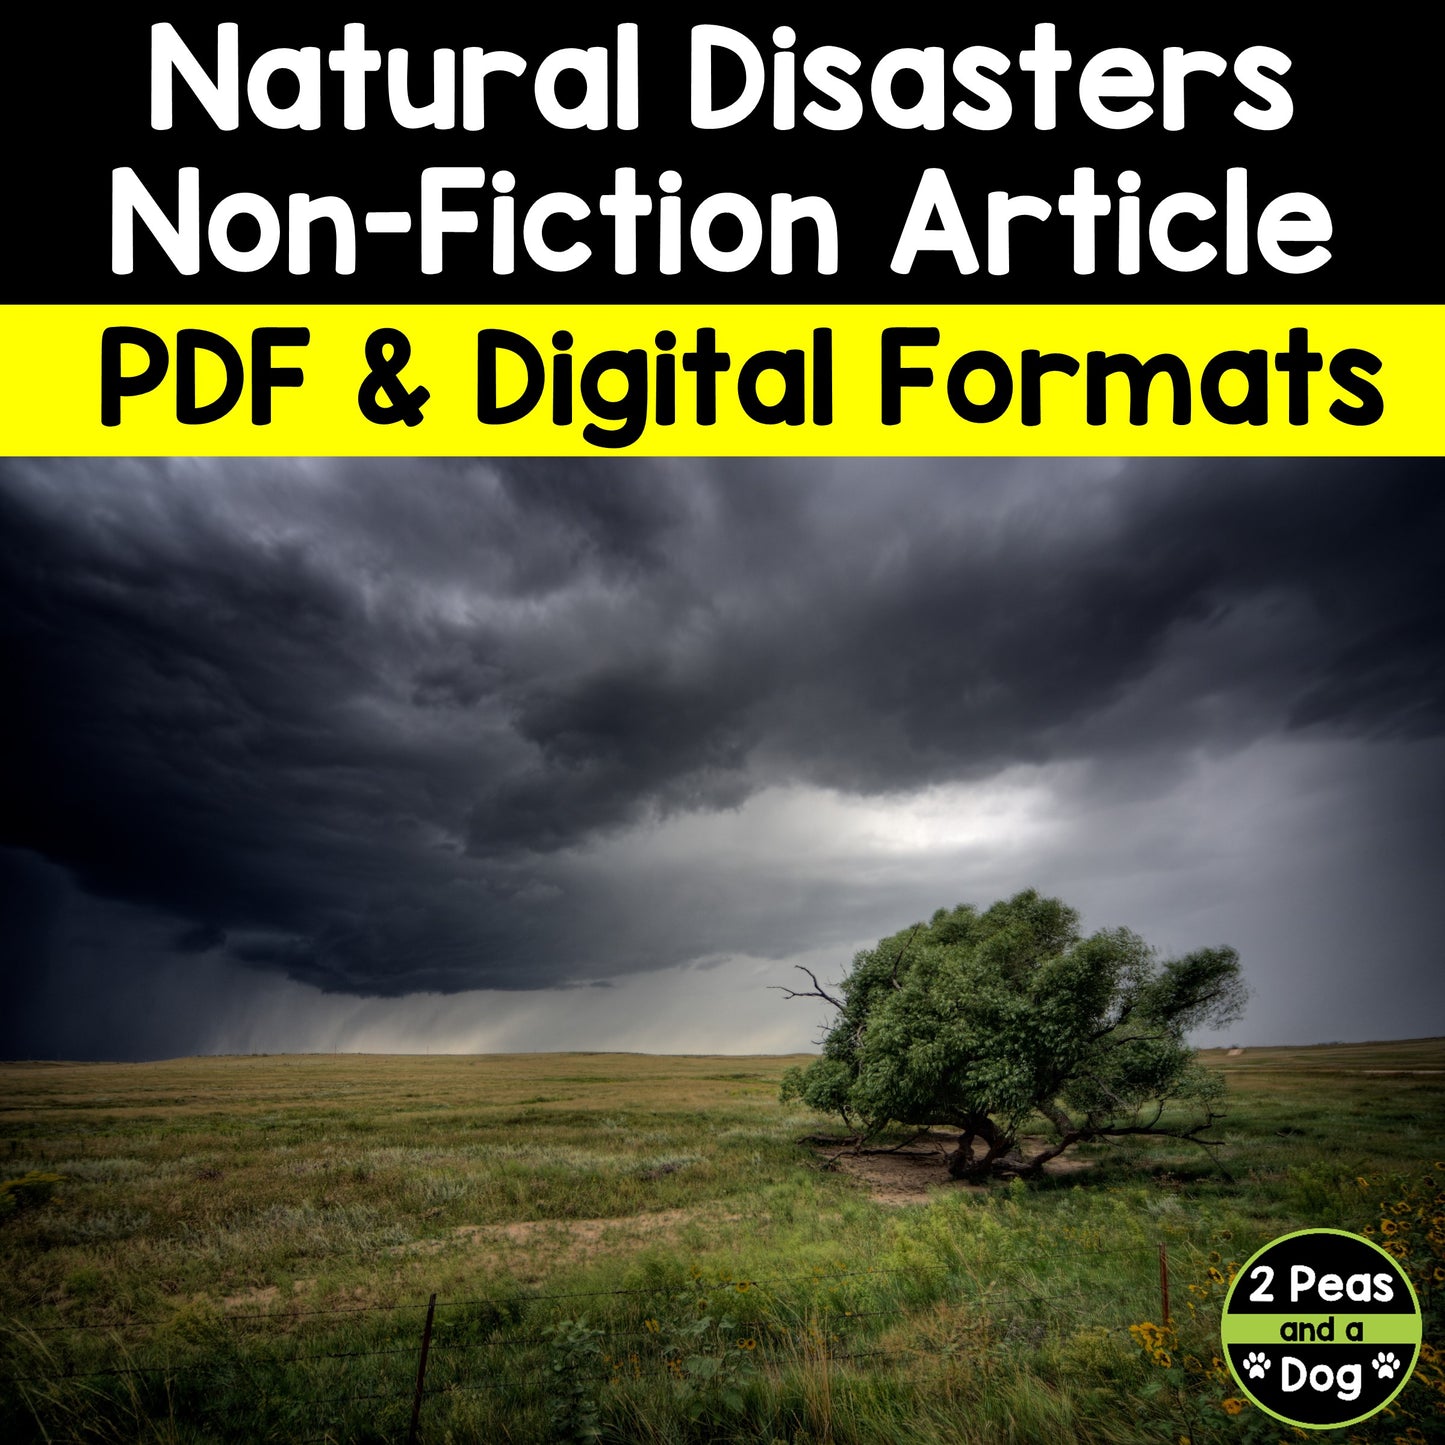 Natural Disasters Non-Fiction Article